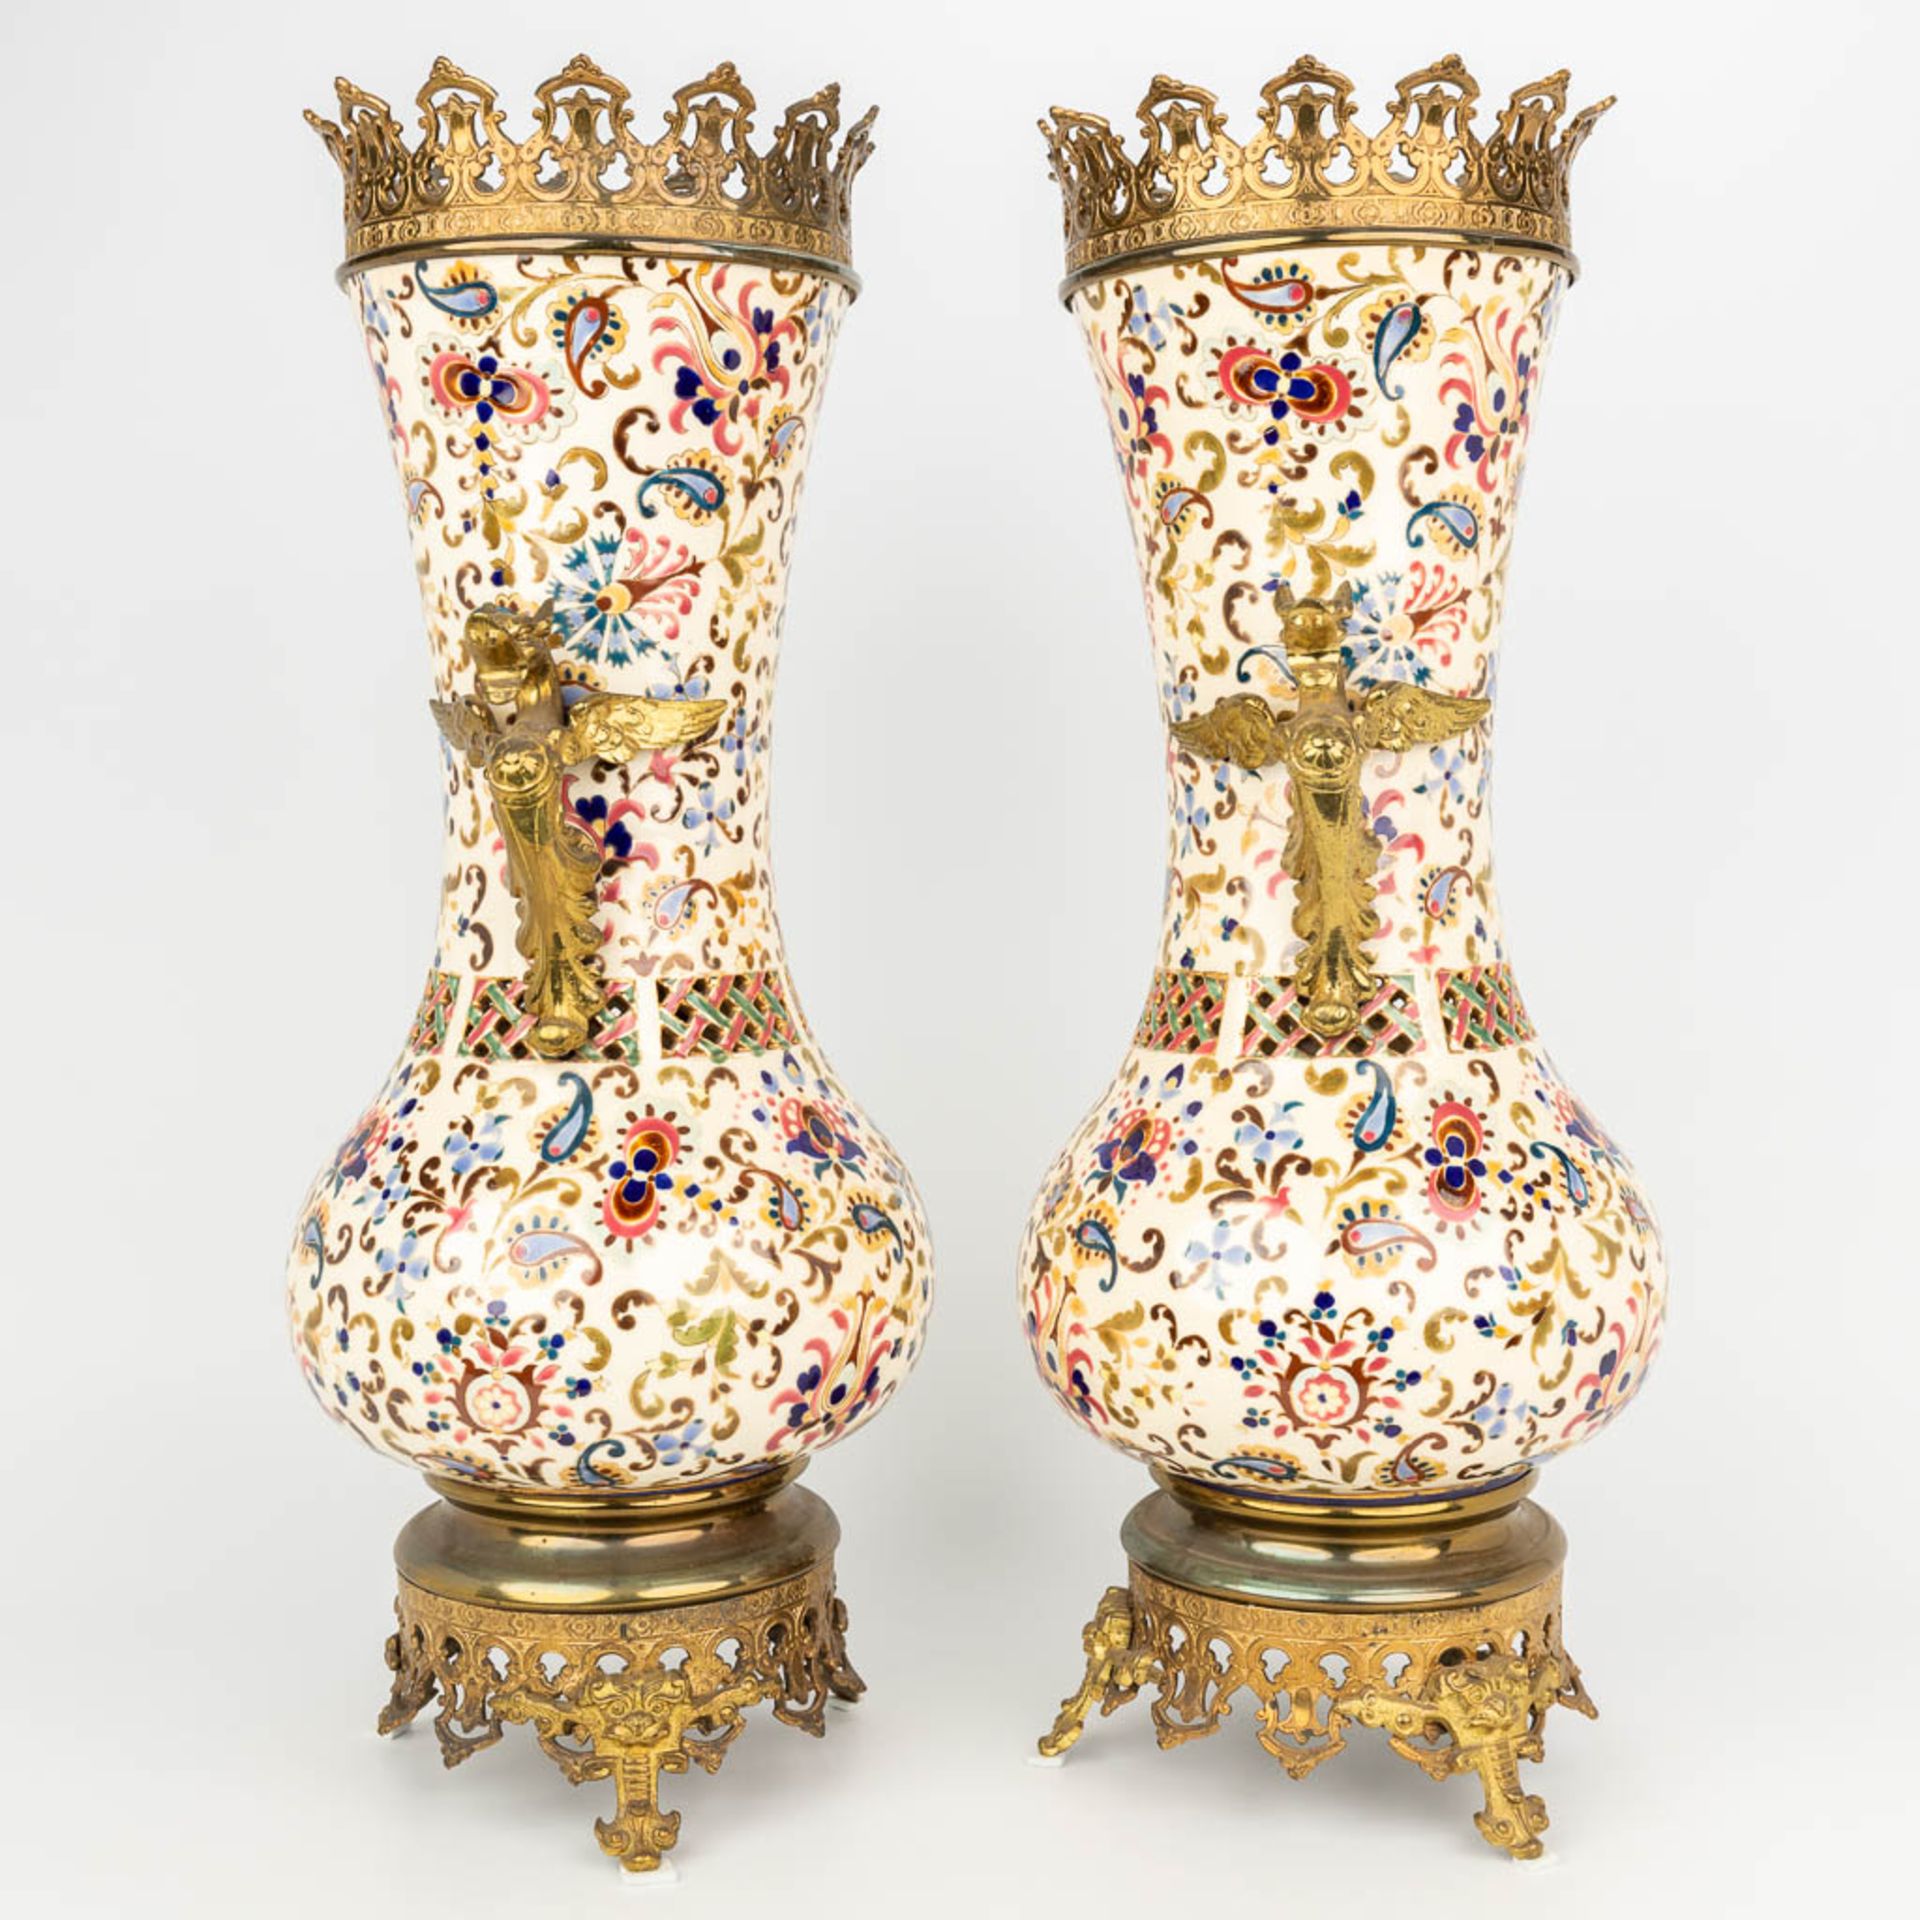 A pair of bronze mounted faience vases marked J. Fischer Budapest, Hungary. (H:54cm) - Image 9 of 12